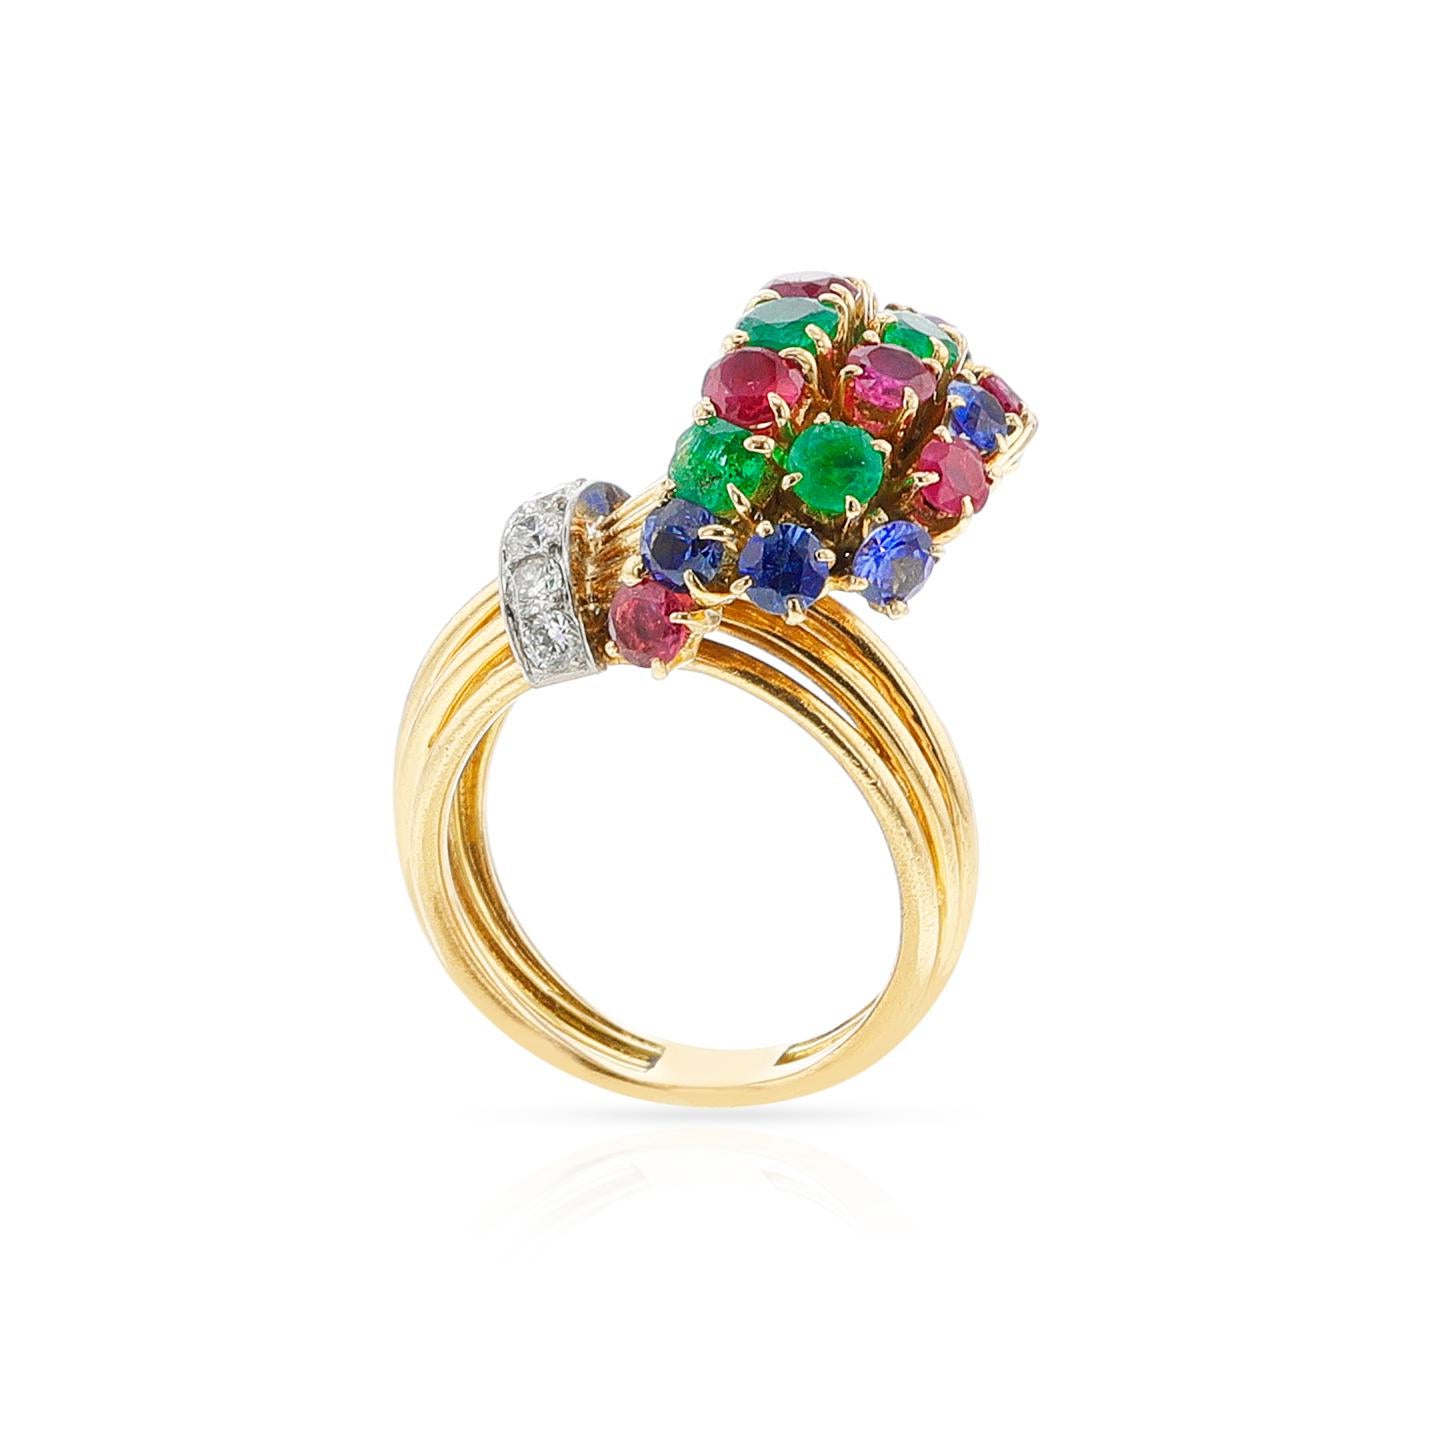 A Ruby, Emerald, Sapphire, Diamond Cocktail Ring made in 18k. The diamonds appx. weigh 0.35 carats. The ring size is 5 3/4. French assay marks. Made in Platinum and 18k gold. The diamonds are H-I color, VS-SI clarity.

1494-FEJRTL